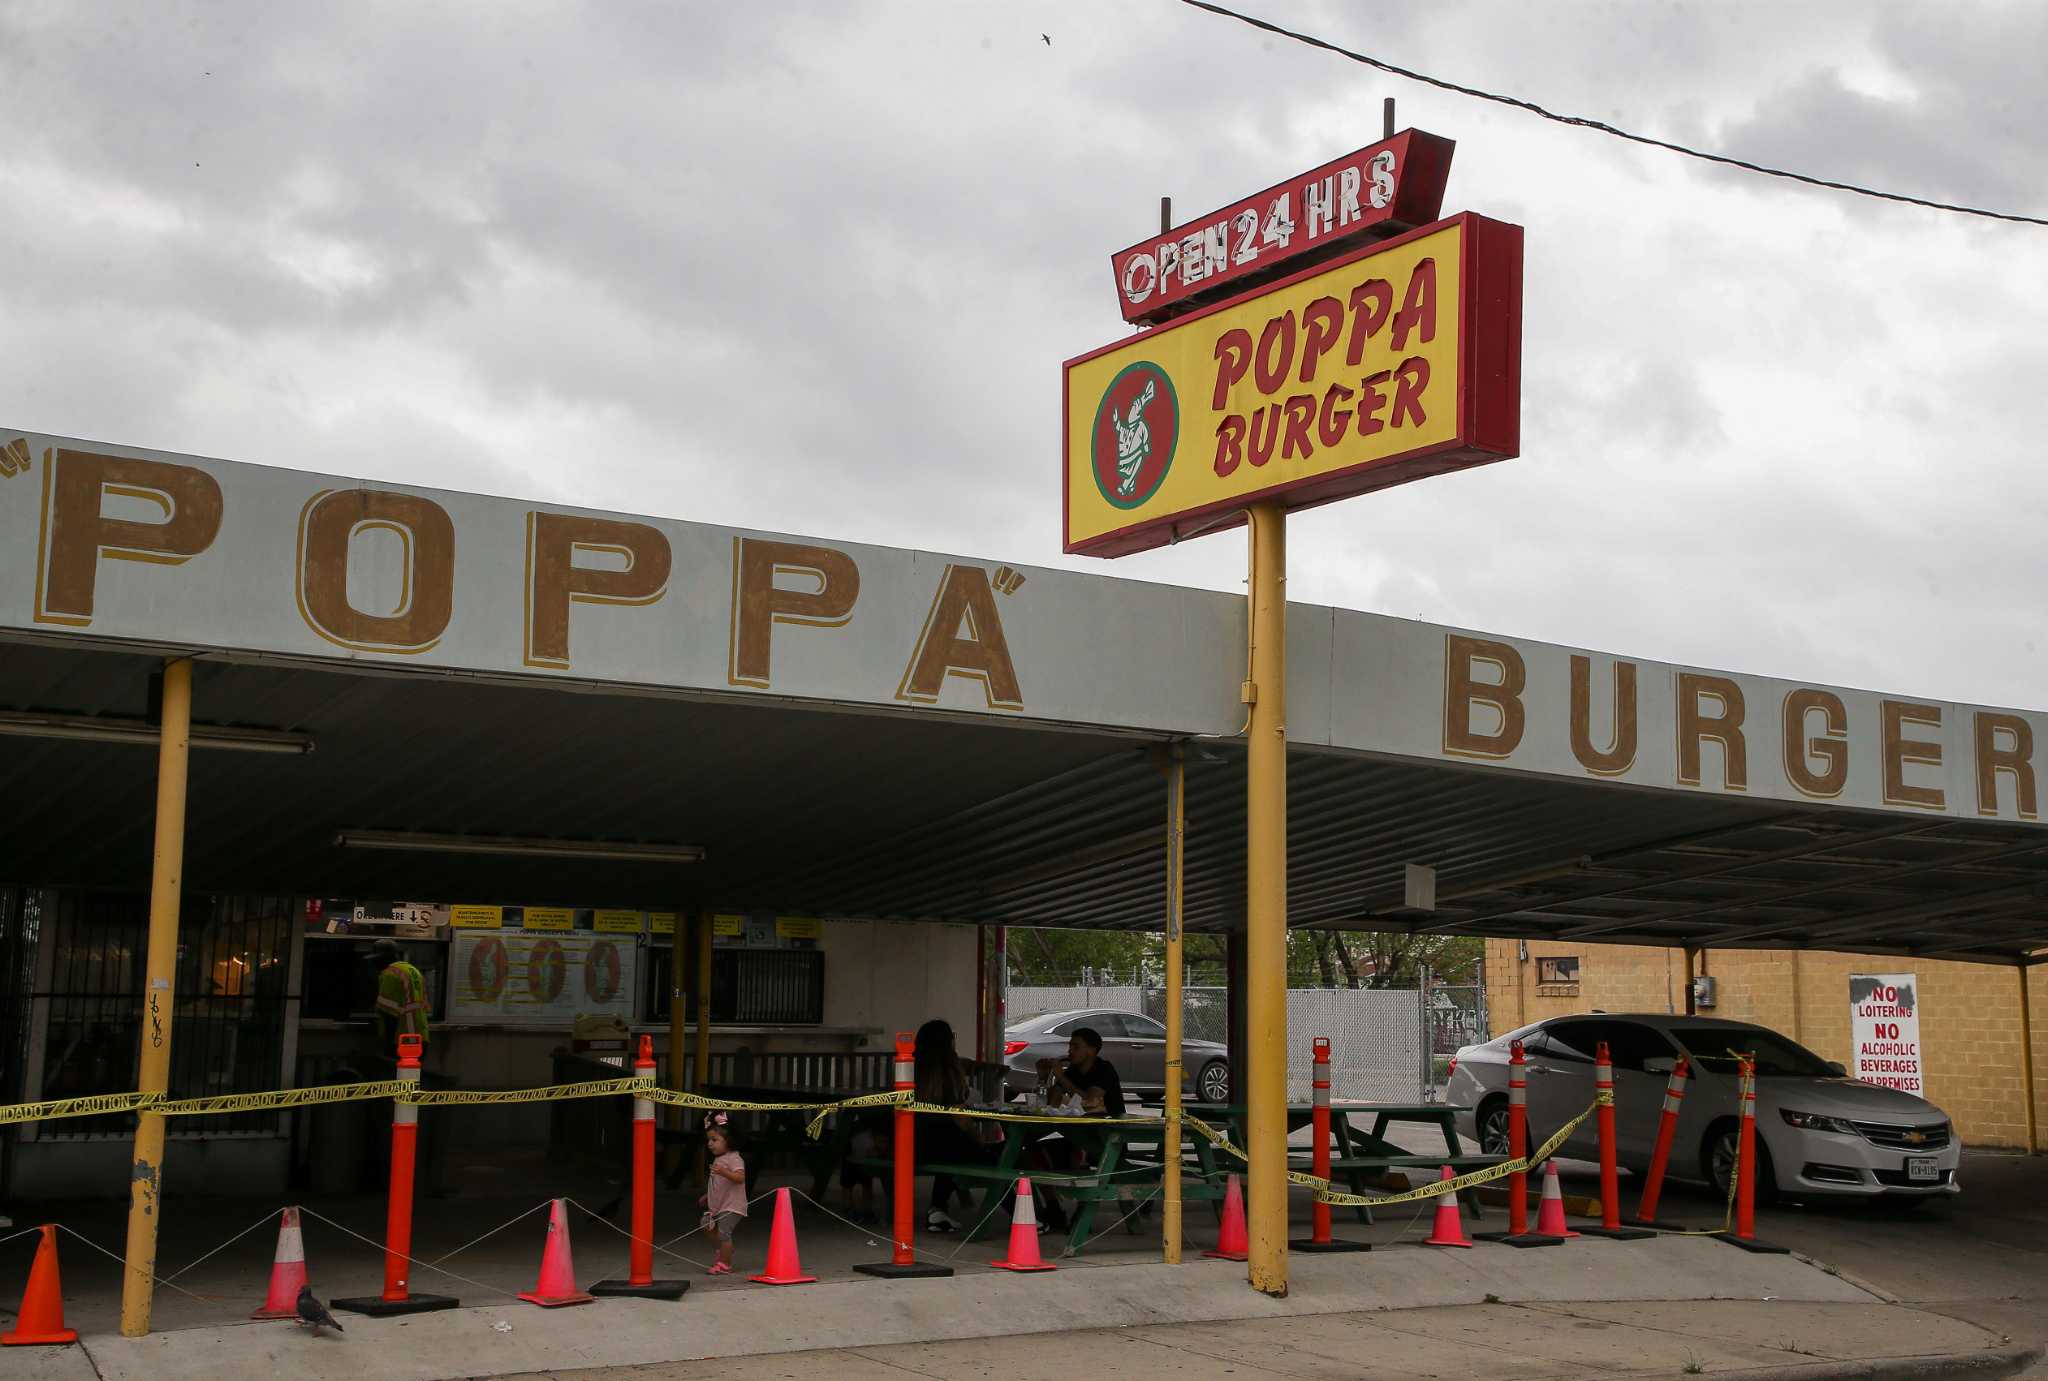 Beloved by Northside residents for 60 years, Poppa Burger stands